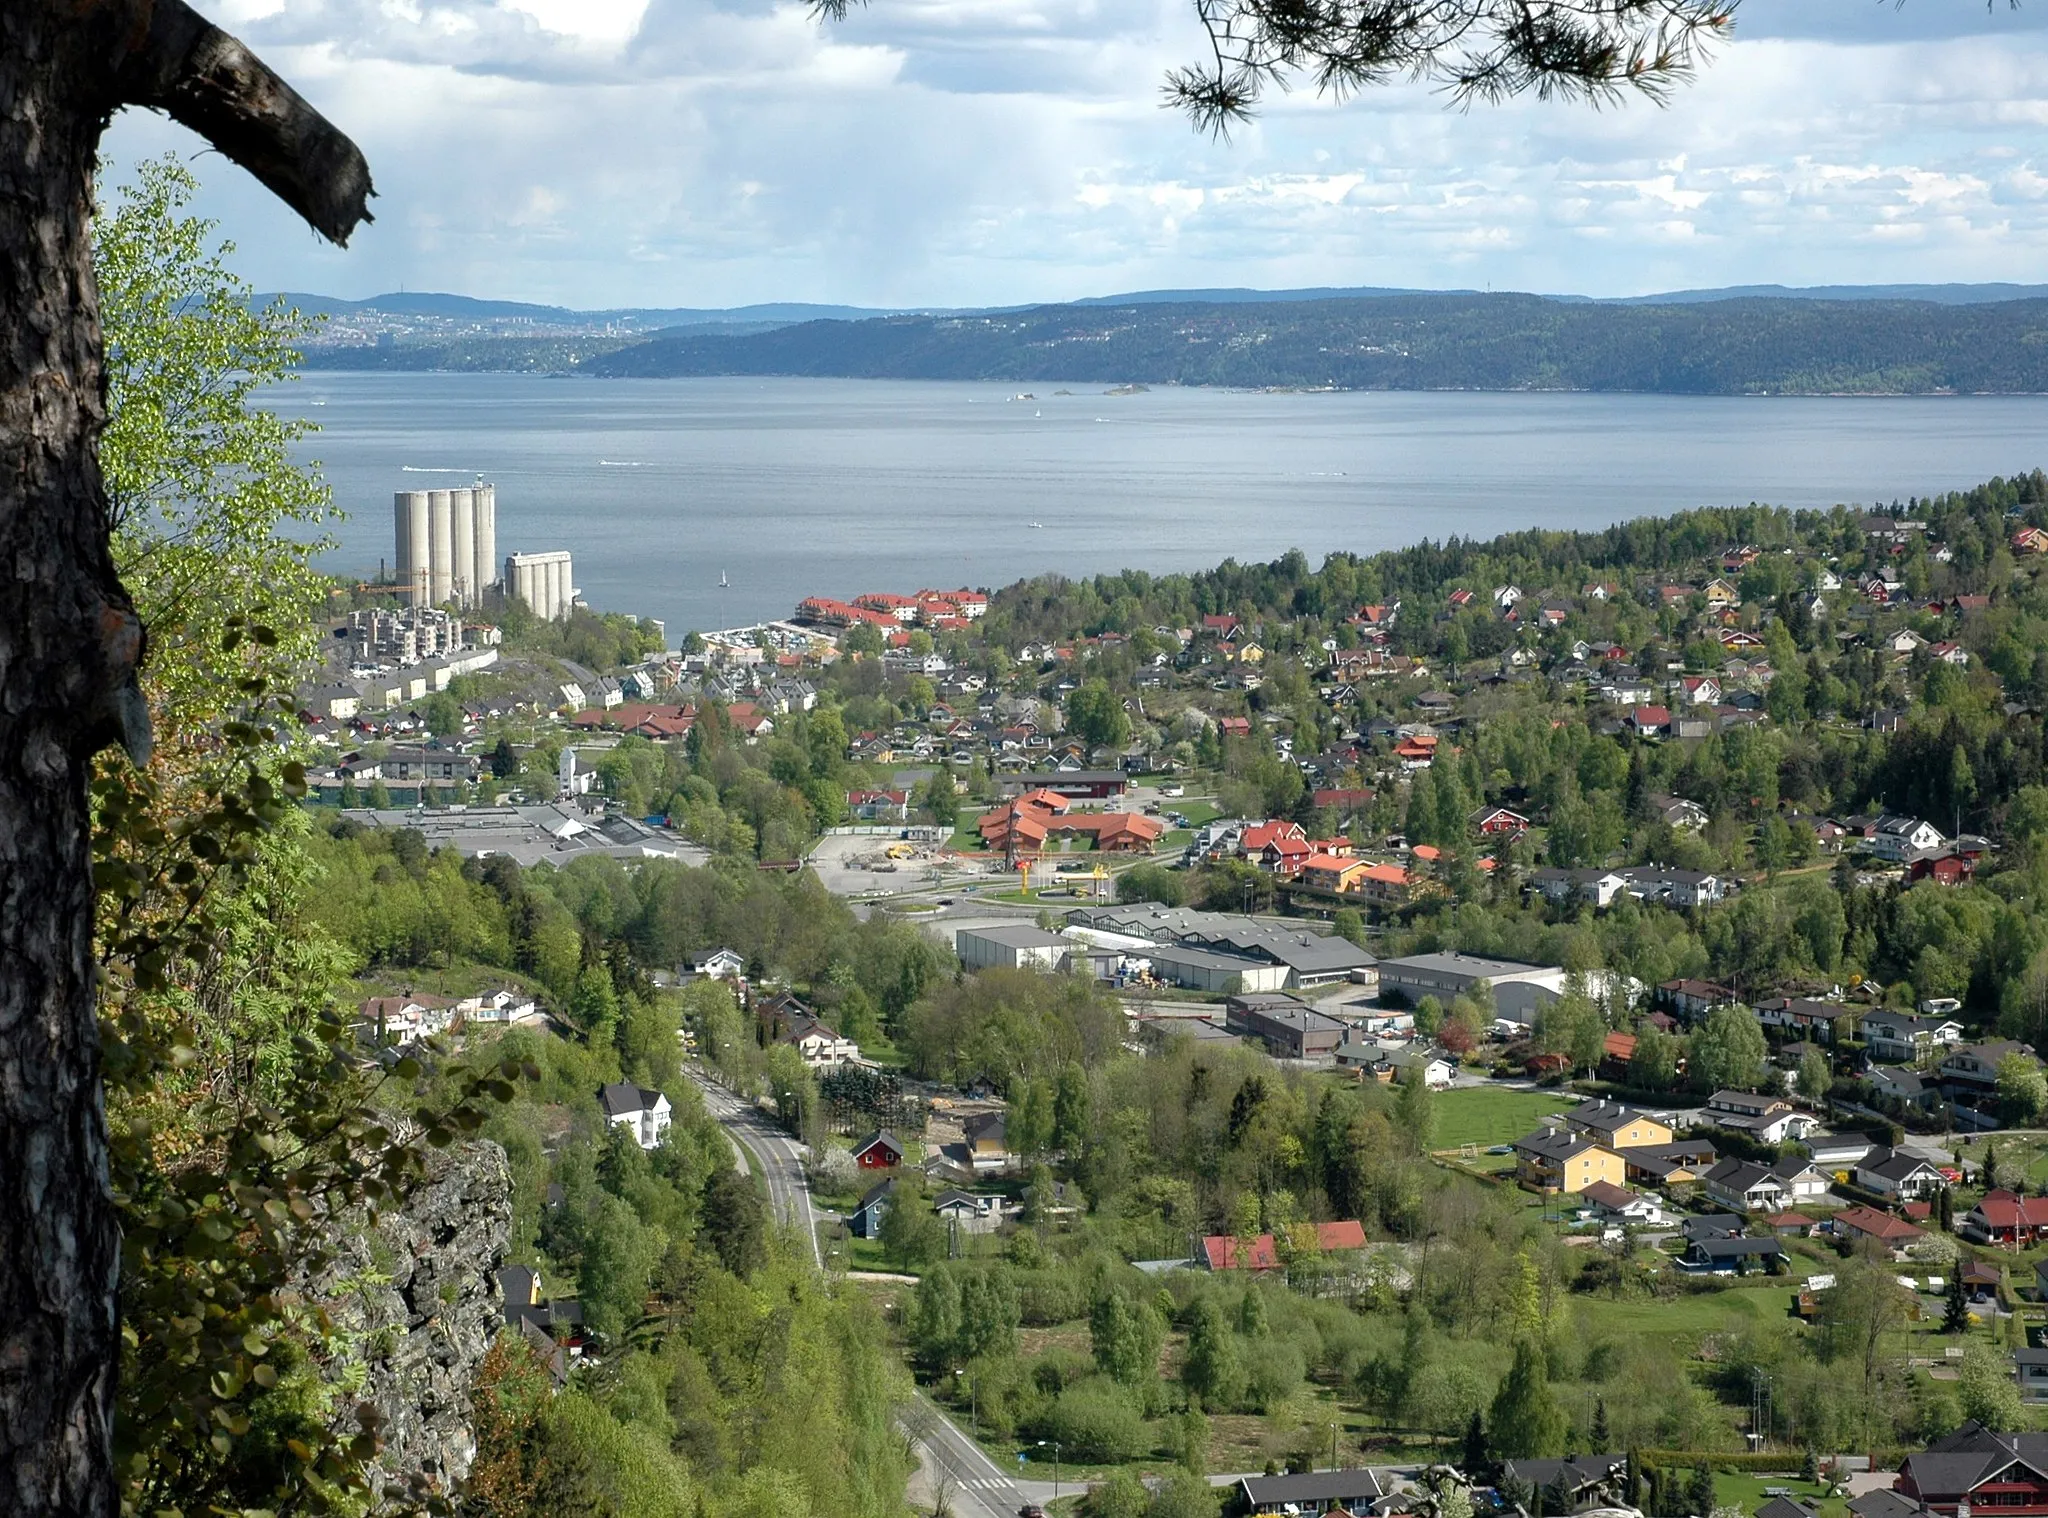 Photo showing: The hamlet of Slemmestad, Norway, seen from the hill Bøsnipa. Picture taken looking east, with Oslo seen in the distance, across the Oslo fjord.